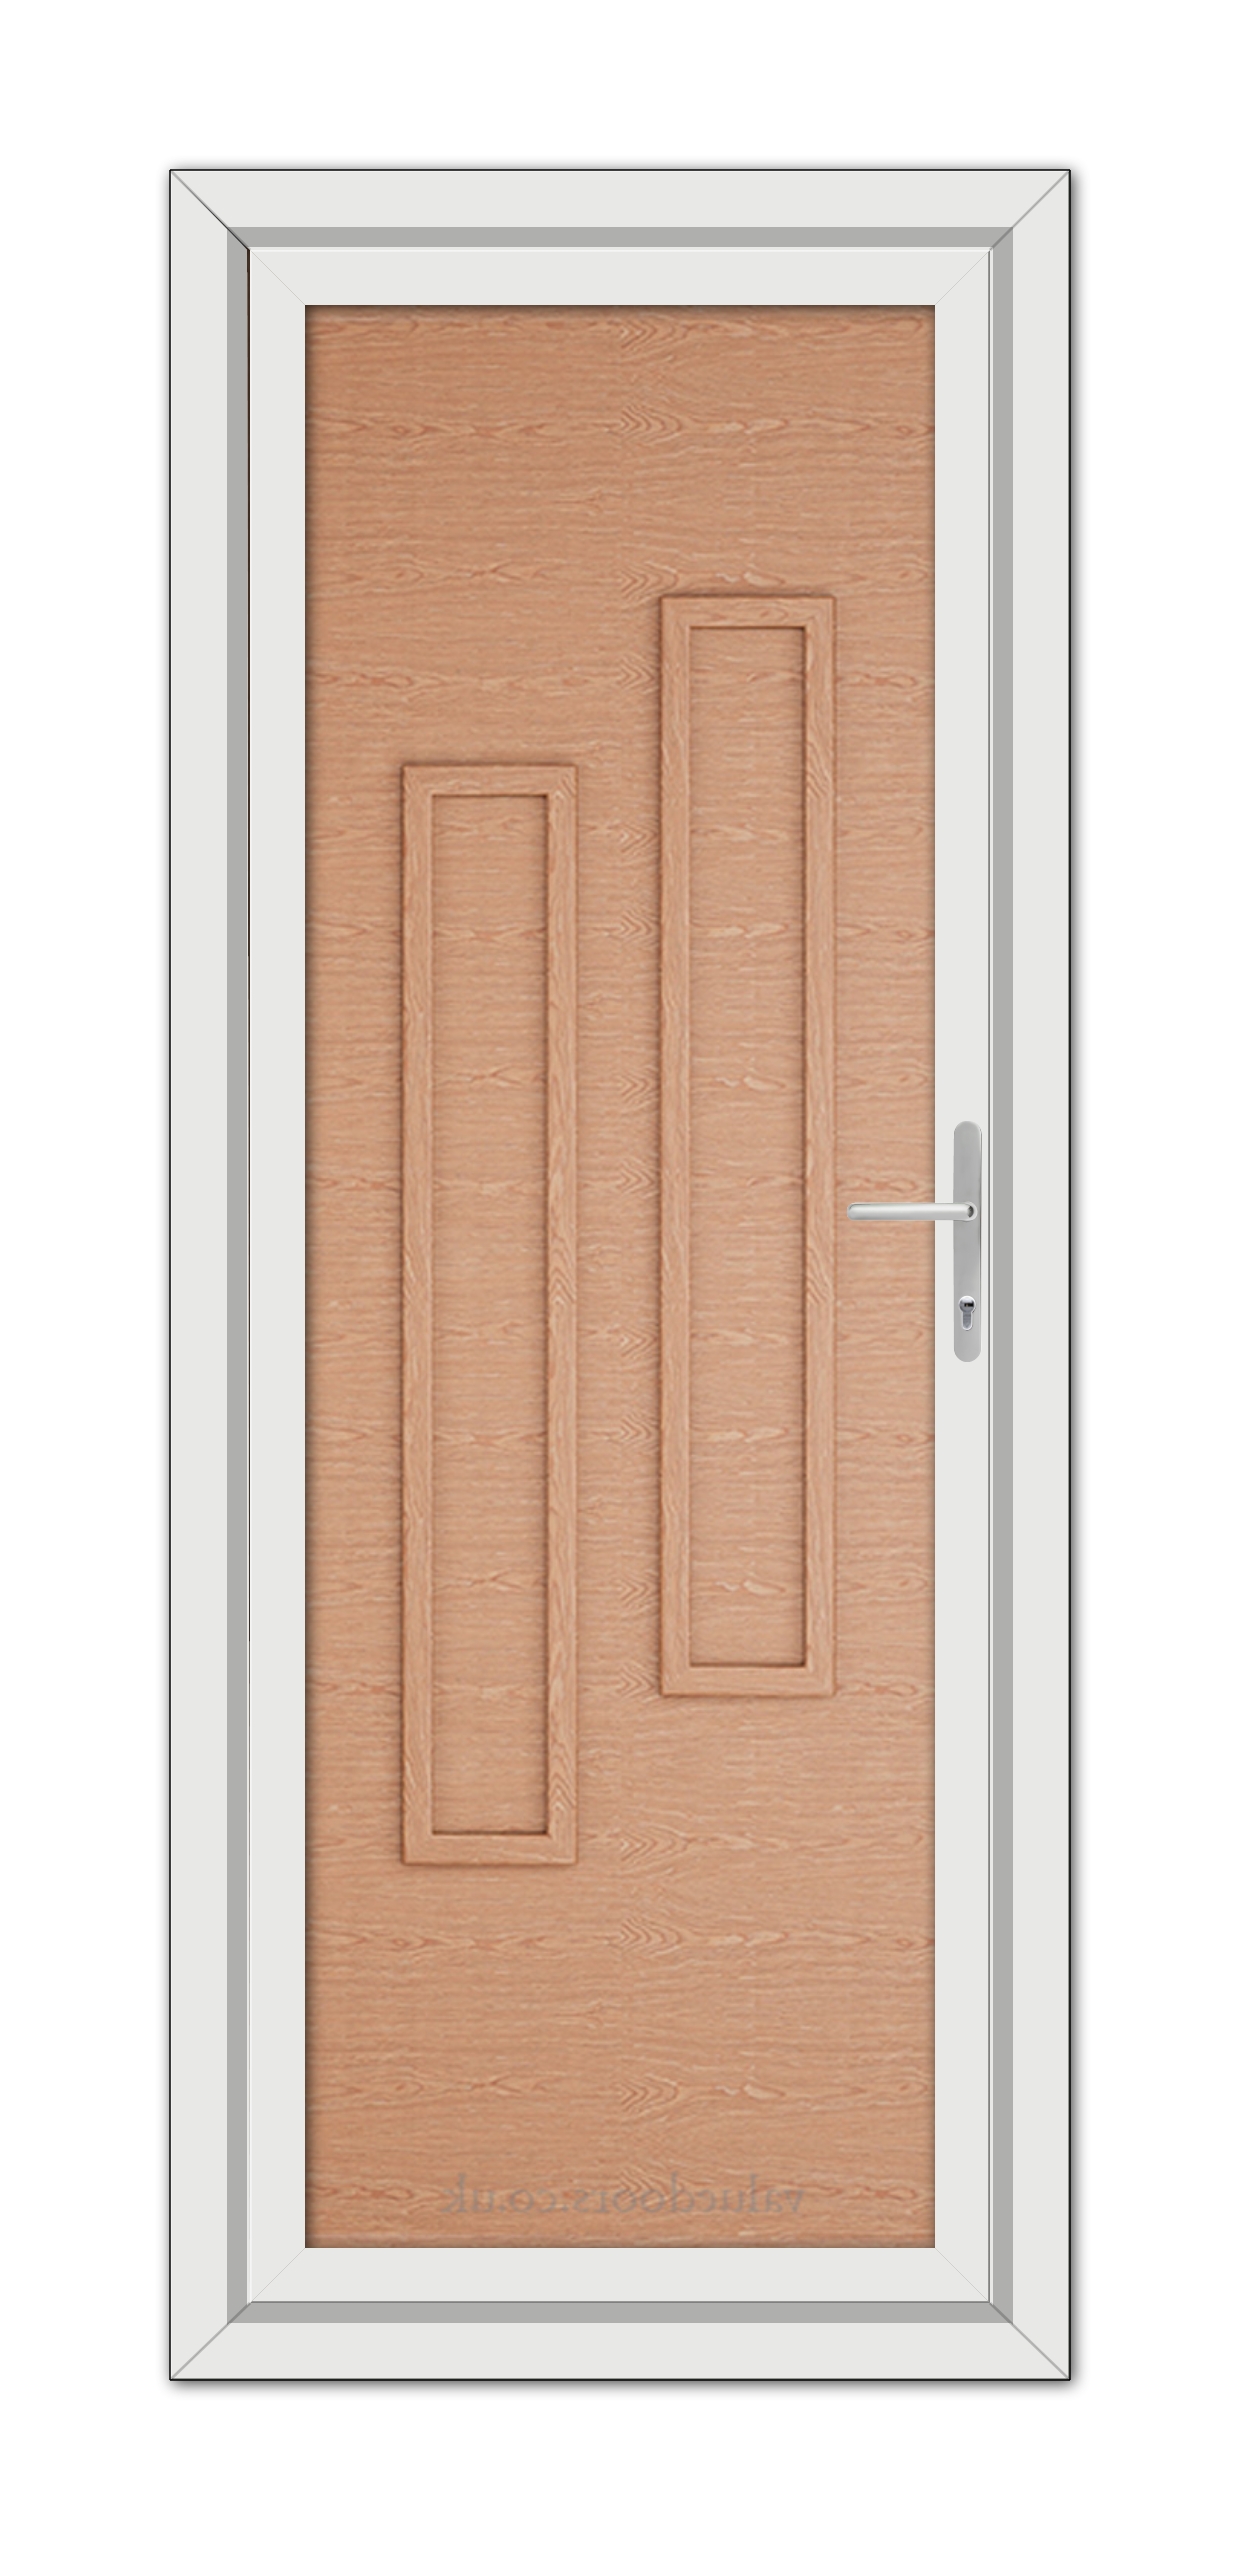 A Irish Oak Modern 5082 Solid uPVC door with a metal handle, presented in a white frame, viewed head-on.